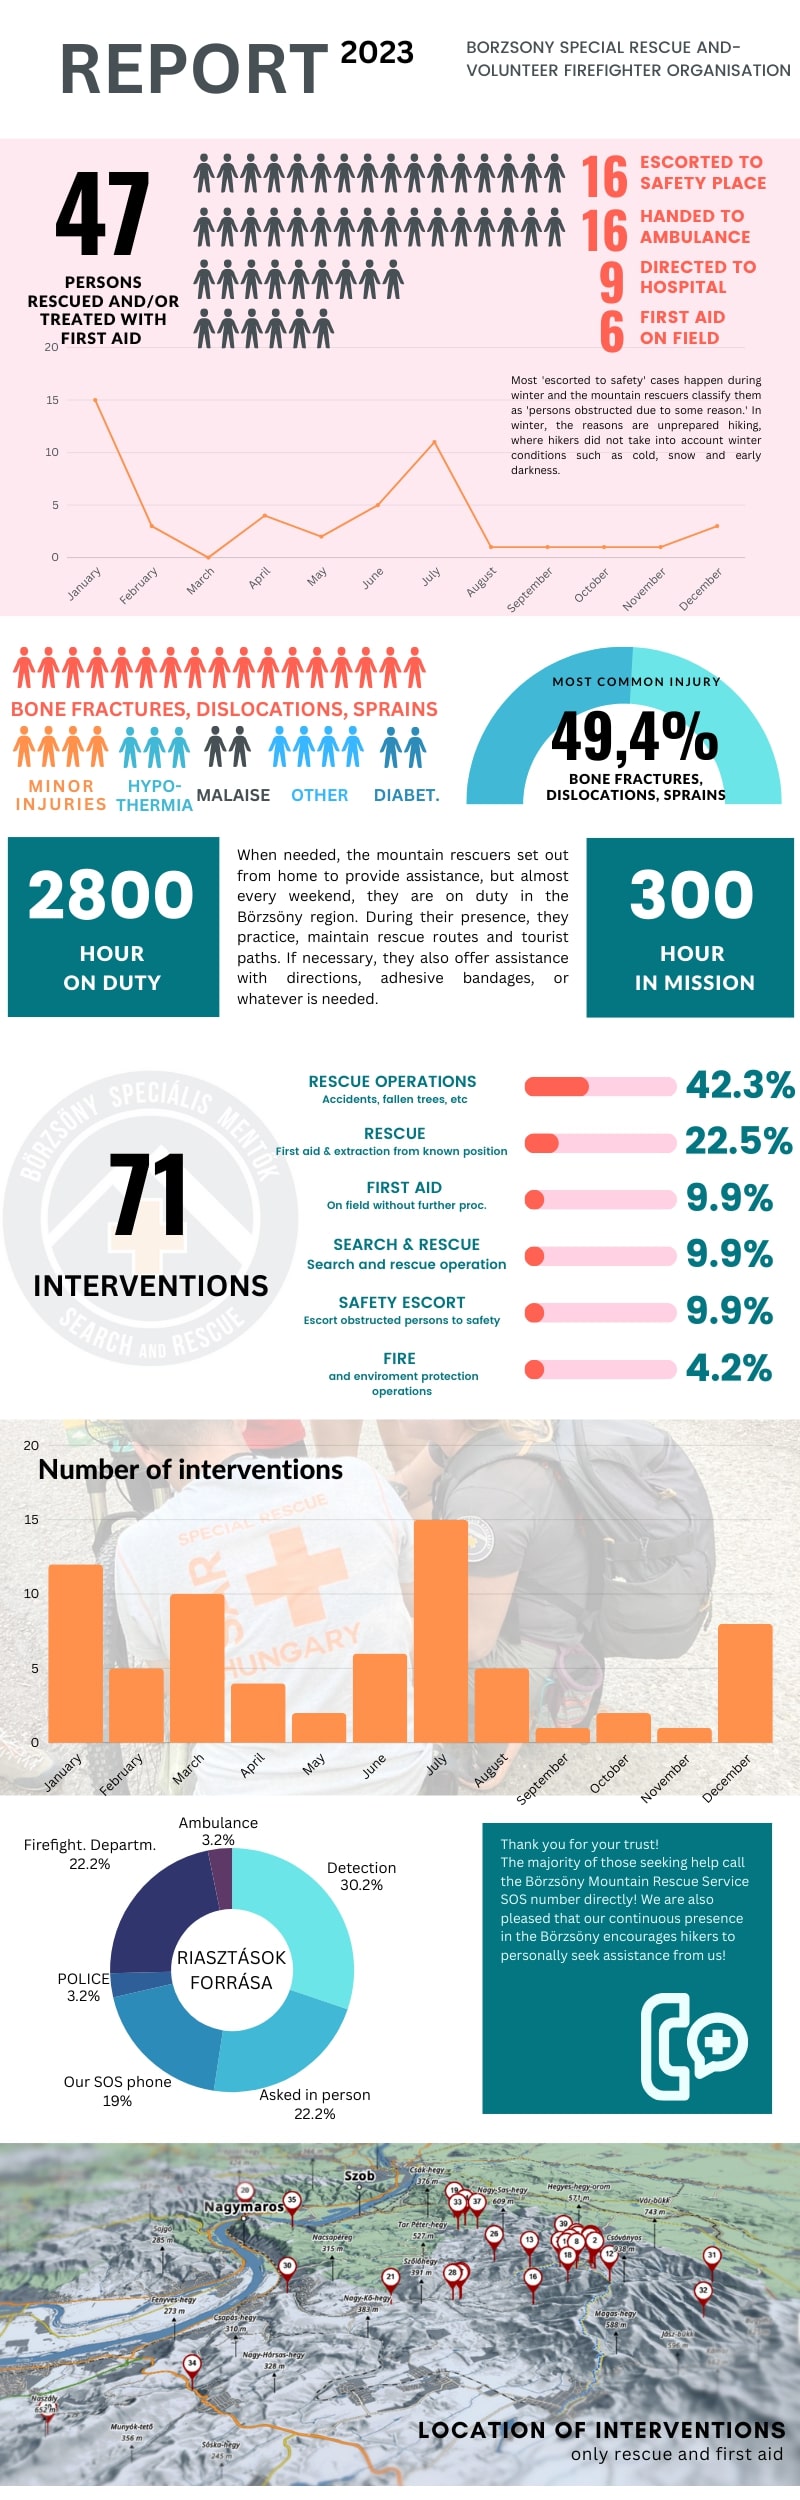 Last year, 71 interventions were carried out (2024.01.11.) - BorzsonySpecialRescue infog 2023 1